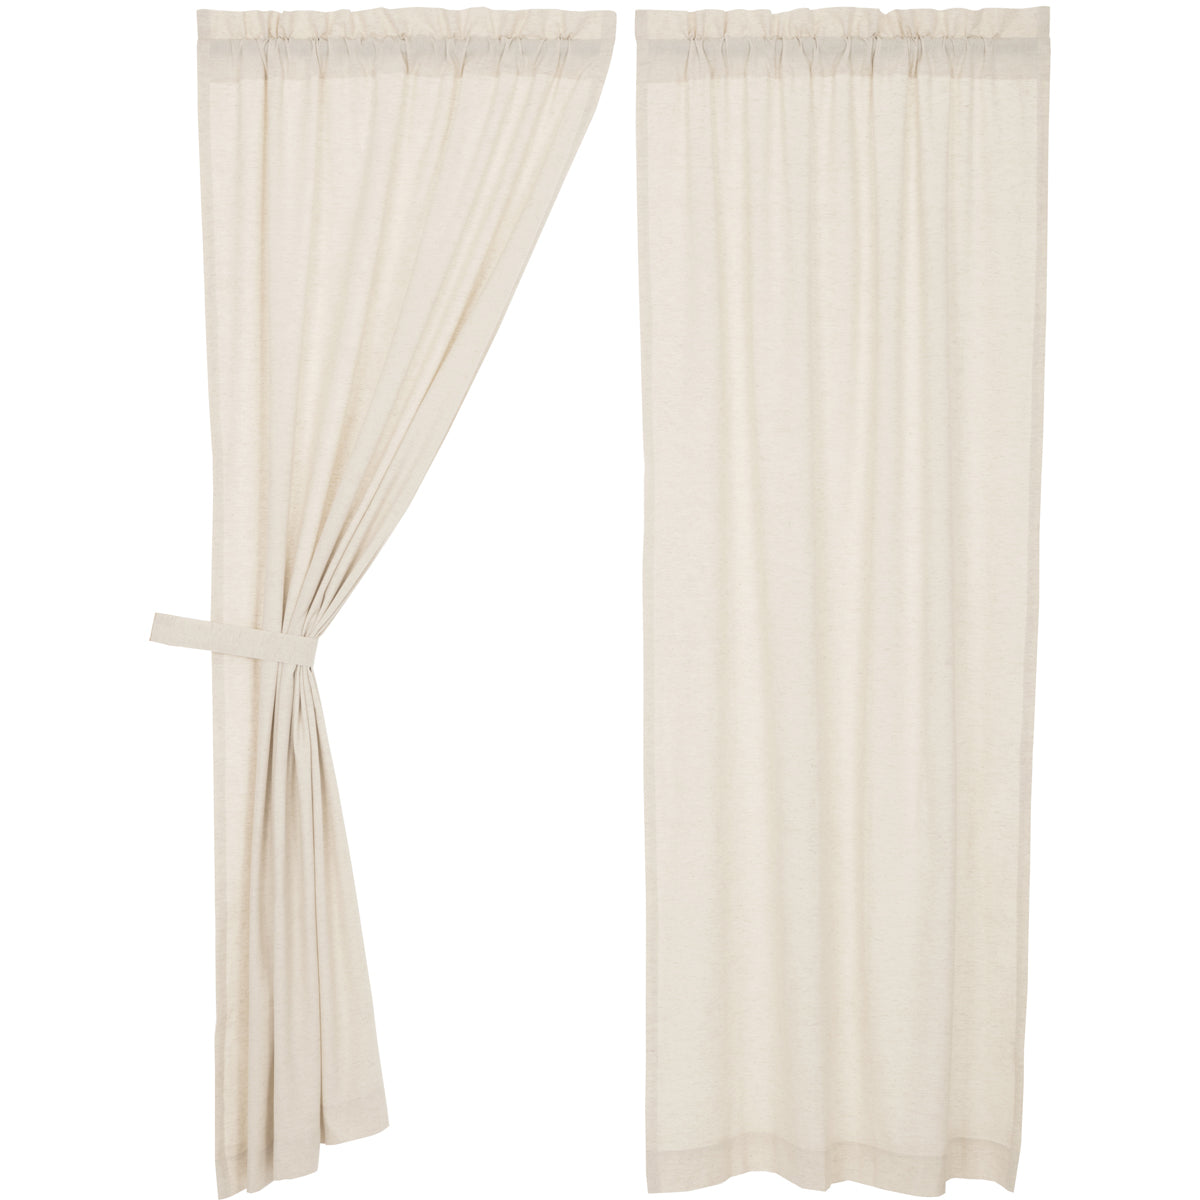 Simple Life Flax Natural Panel Set of 2 84x40